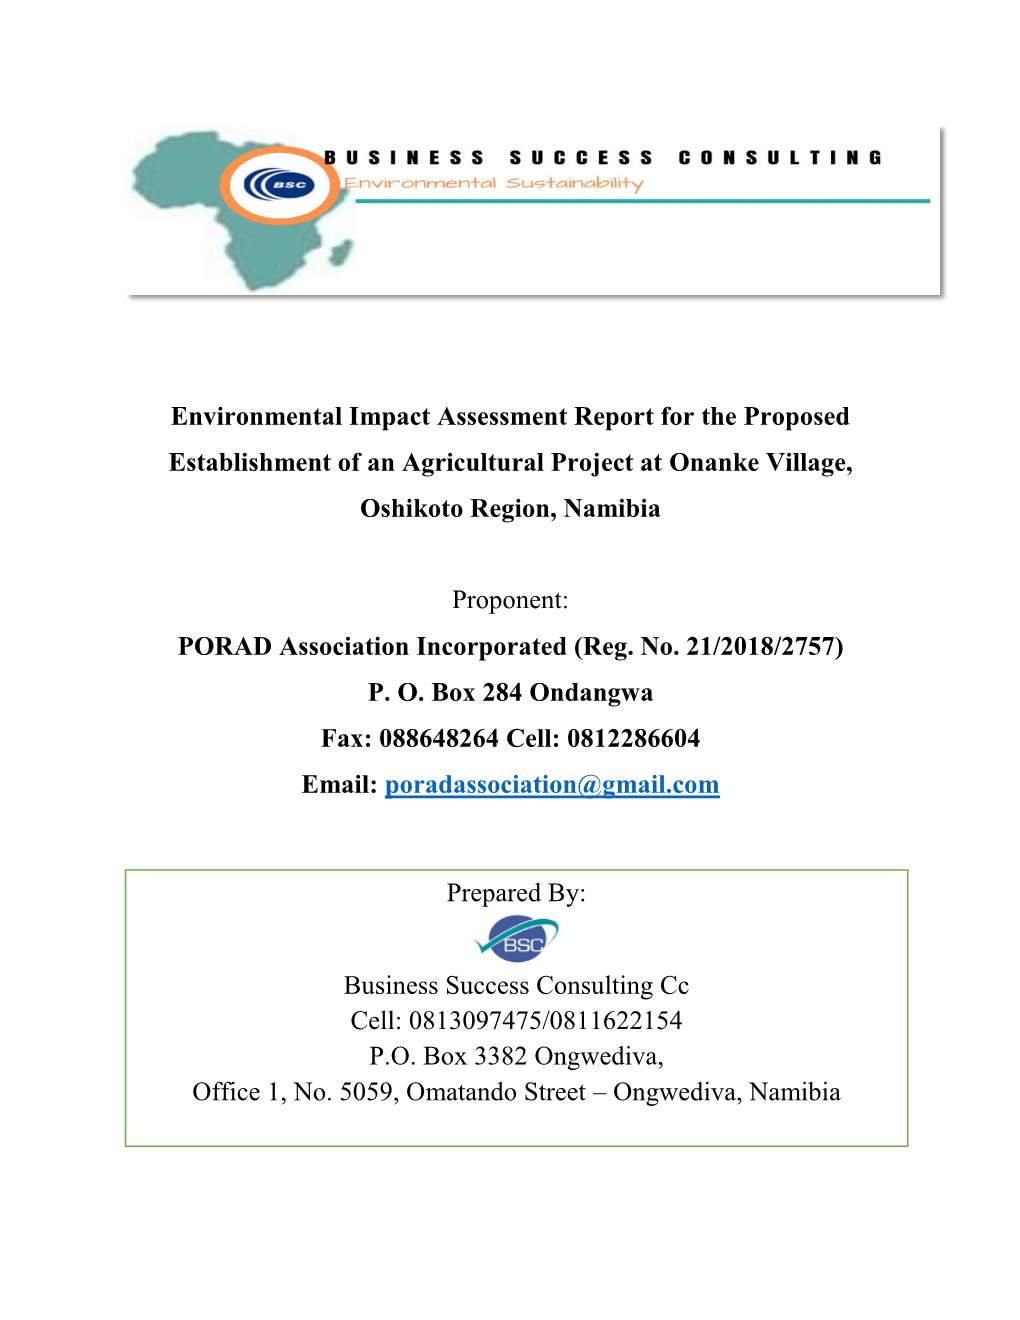 Environmental Impact Assessment Report for the Proposed Establishment of an Agricultural Project at Onanke Village, Oshikoto Region, Namibia